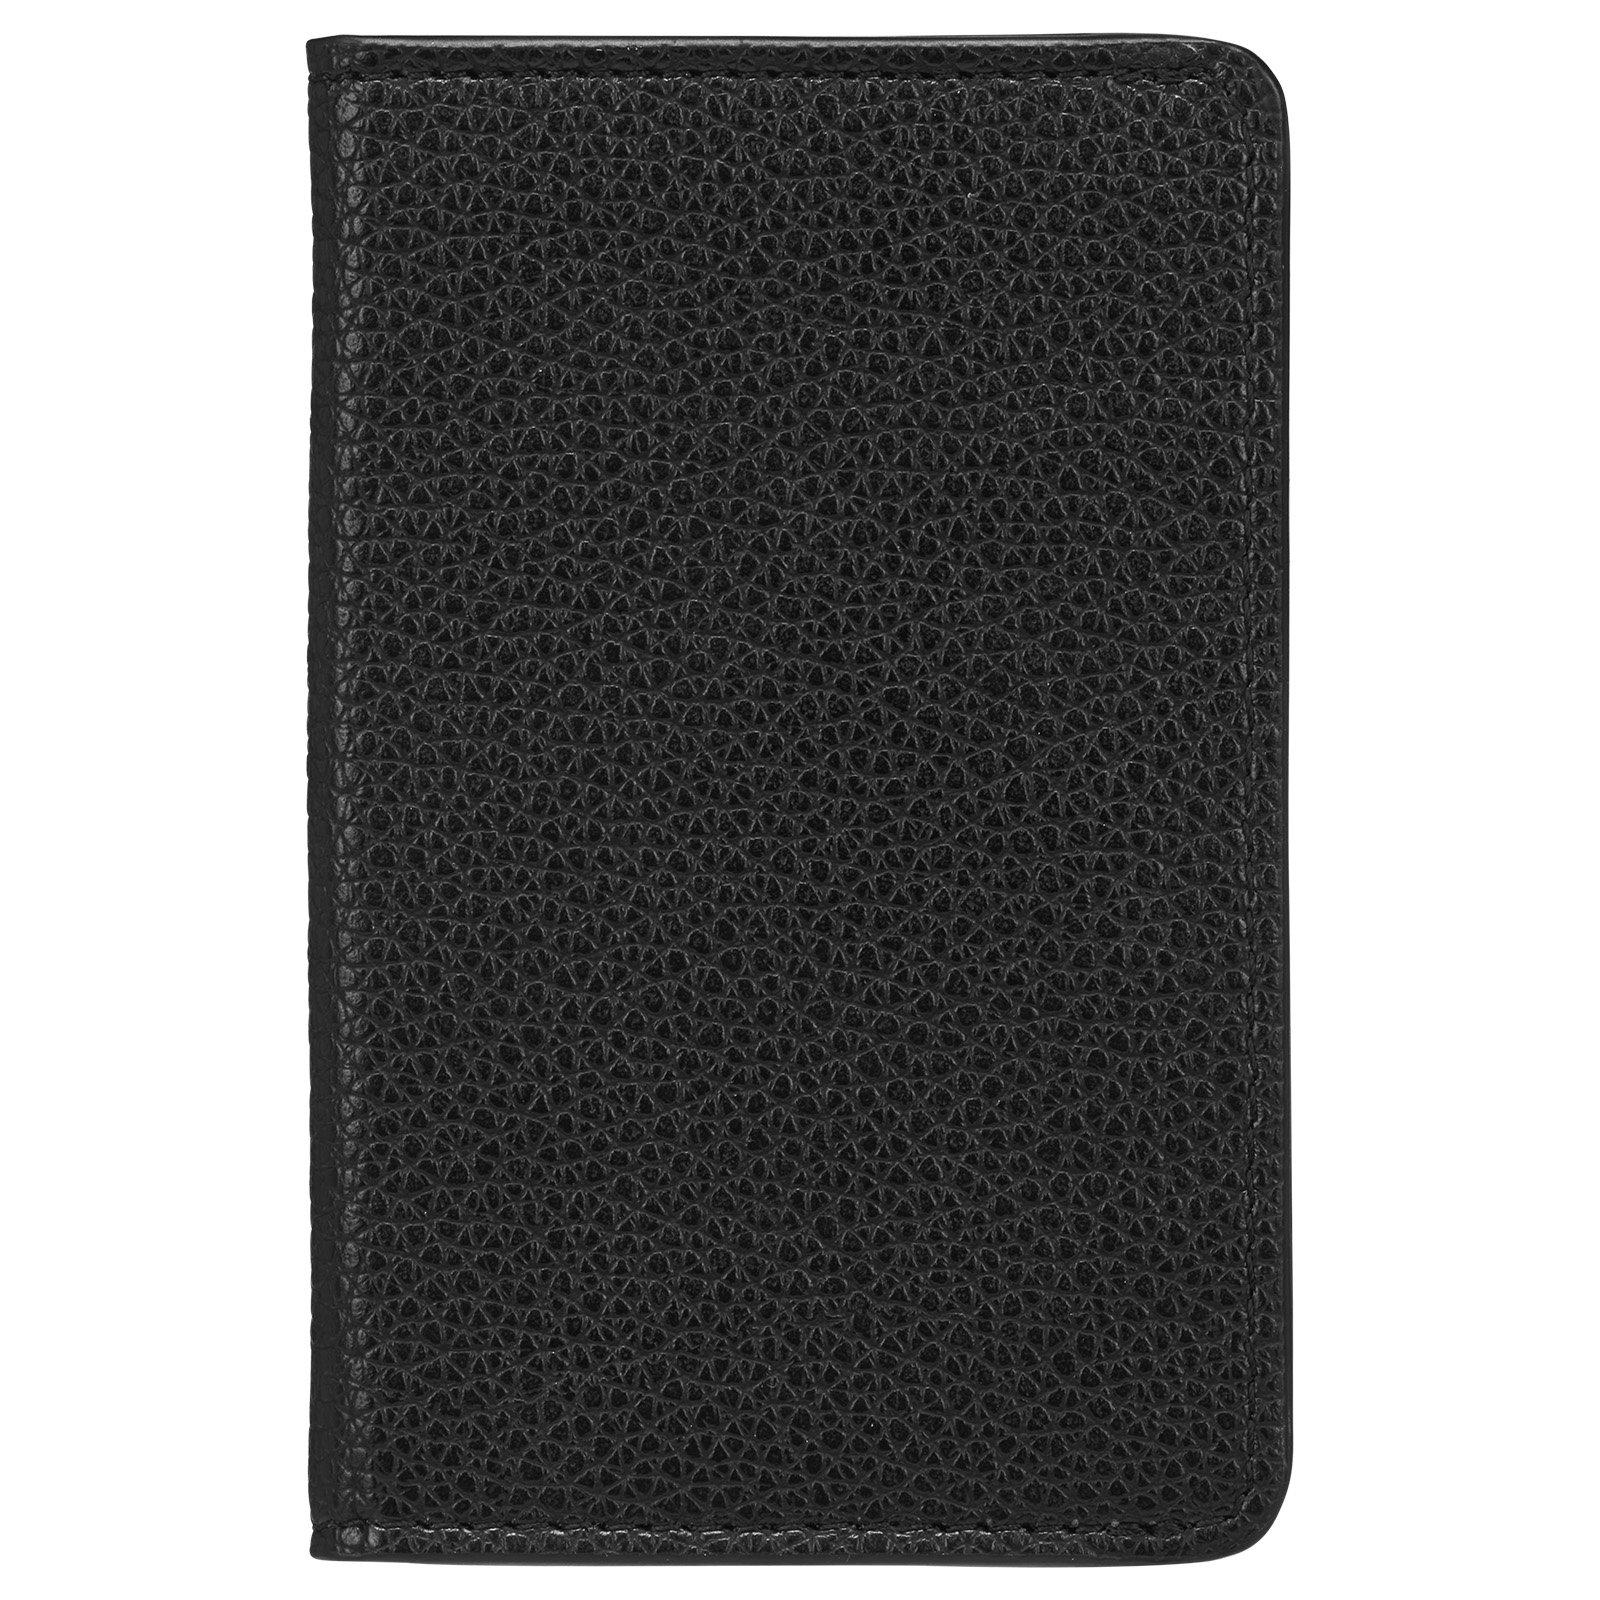 Case-Mate Apple iPhone 12 and 12 Pro Tough Leather Wallet Folio Case - Black